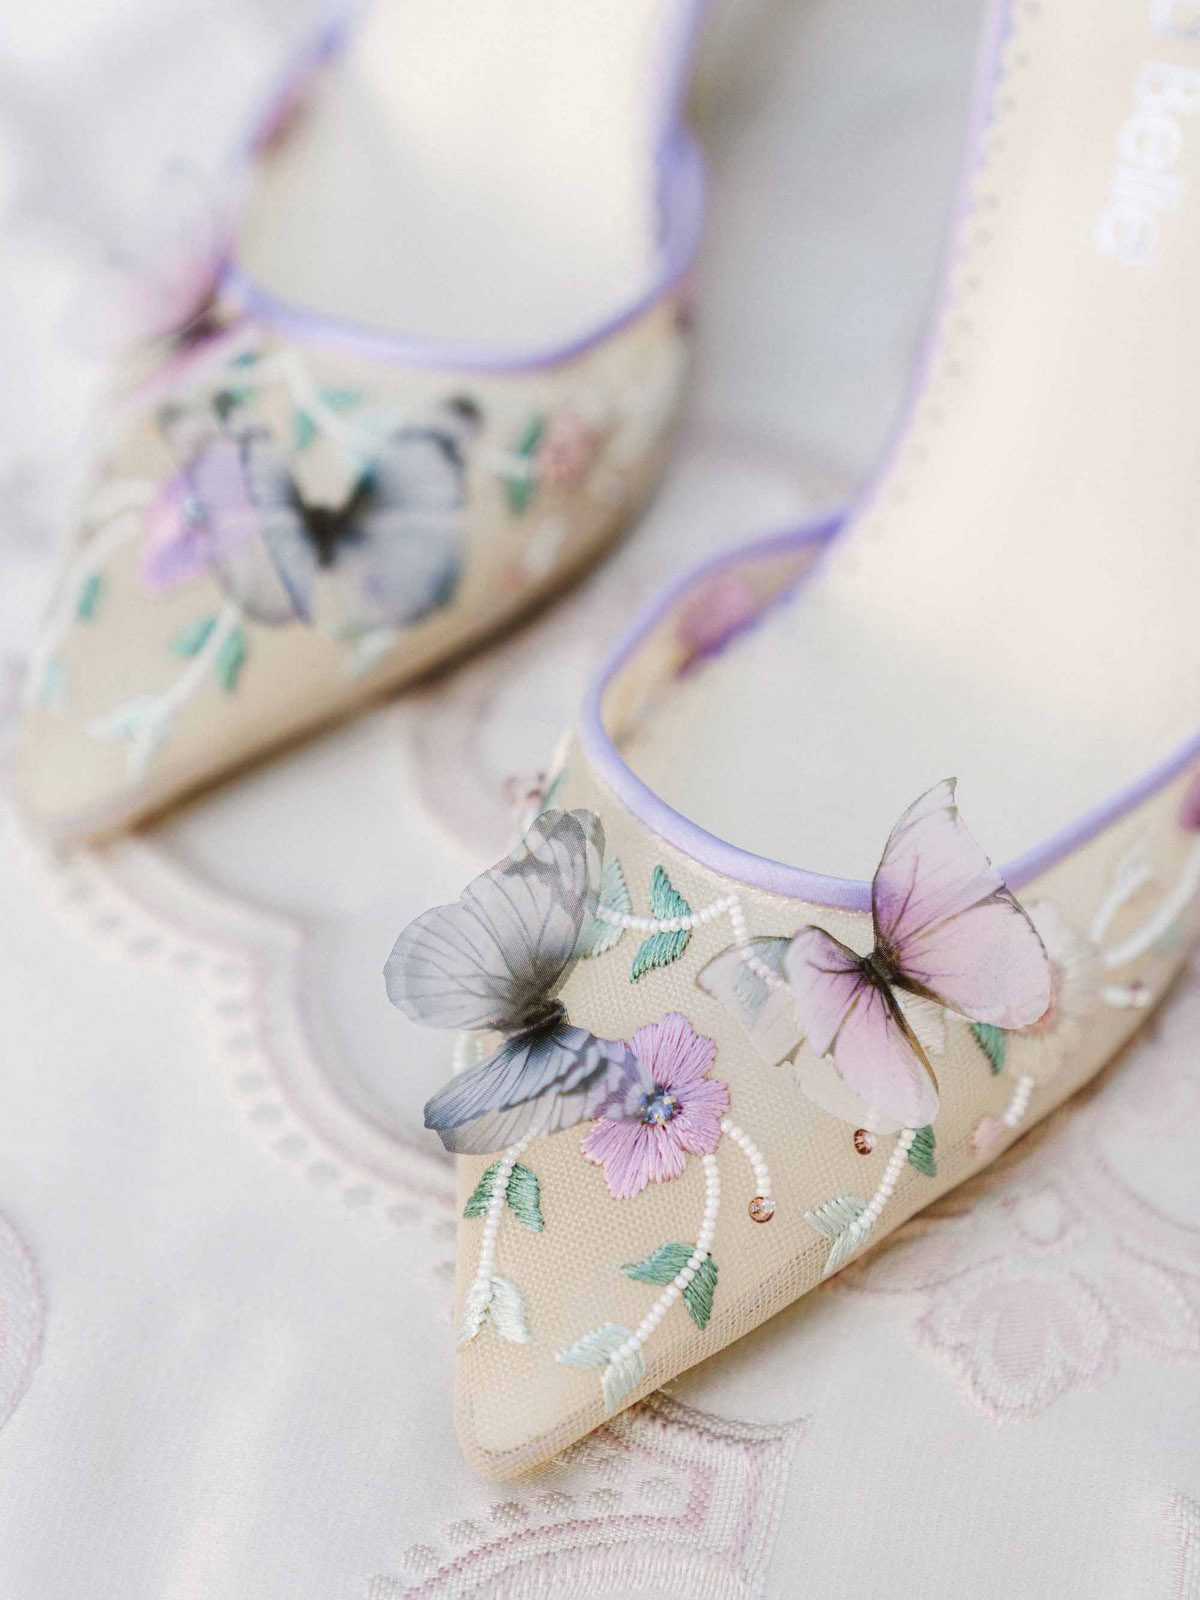 Wedding shoes with butterflies, by Bella Belle